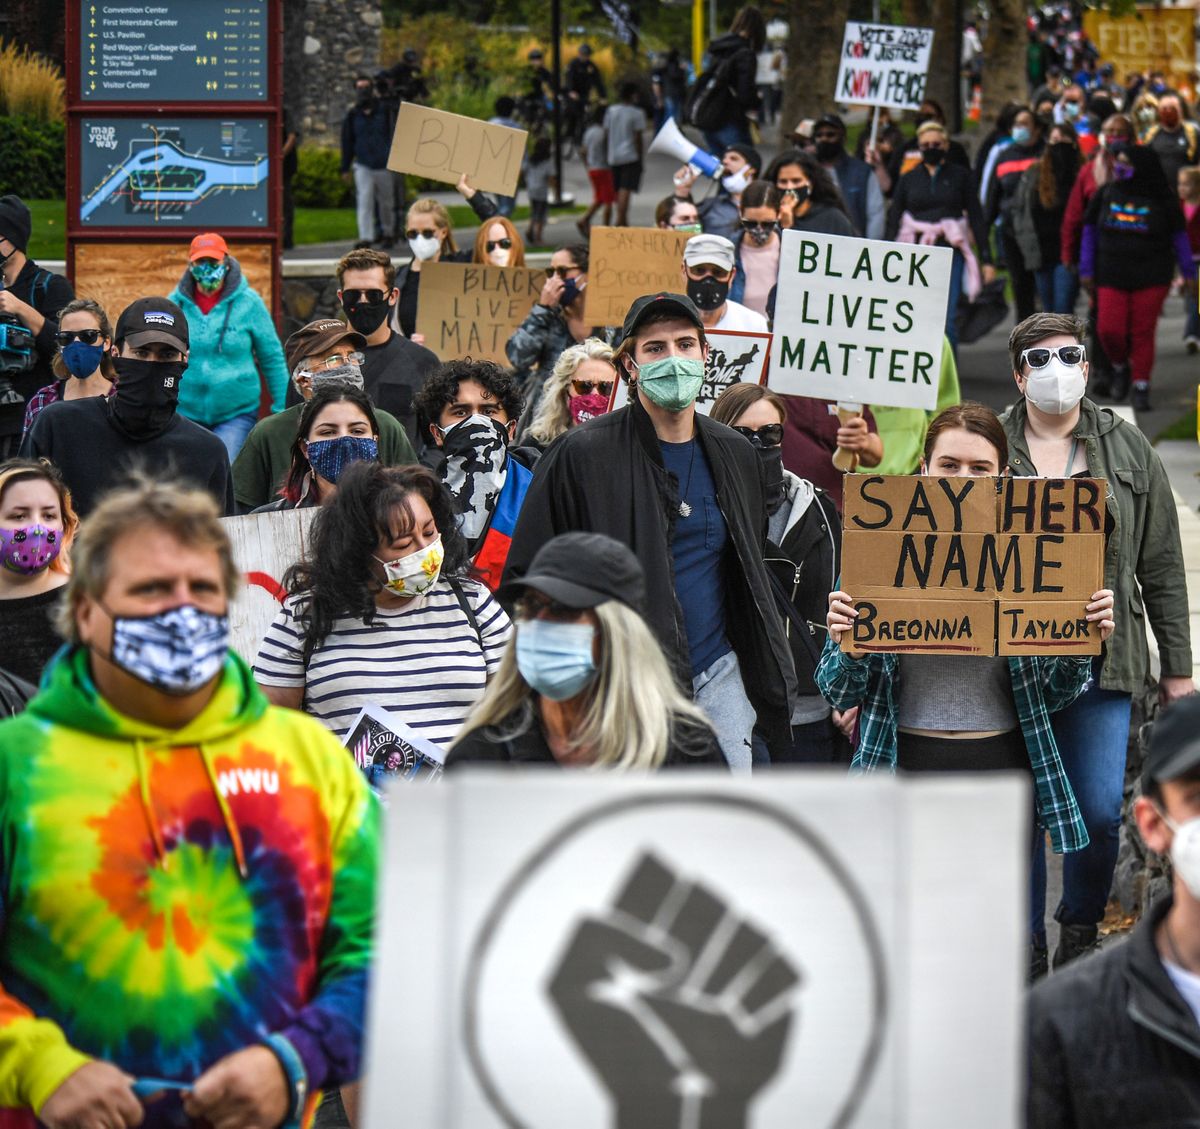 Hundreds of people gather to march through Riverfront Park on Saturday as part of the Occupy Spokane nonviolent protest for Breonna Taylor.  (DAN PELLE/THE SPOKESMAN-REVIEW)